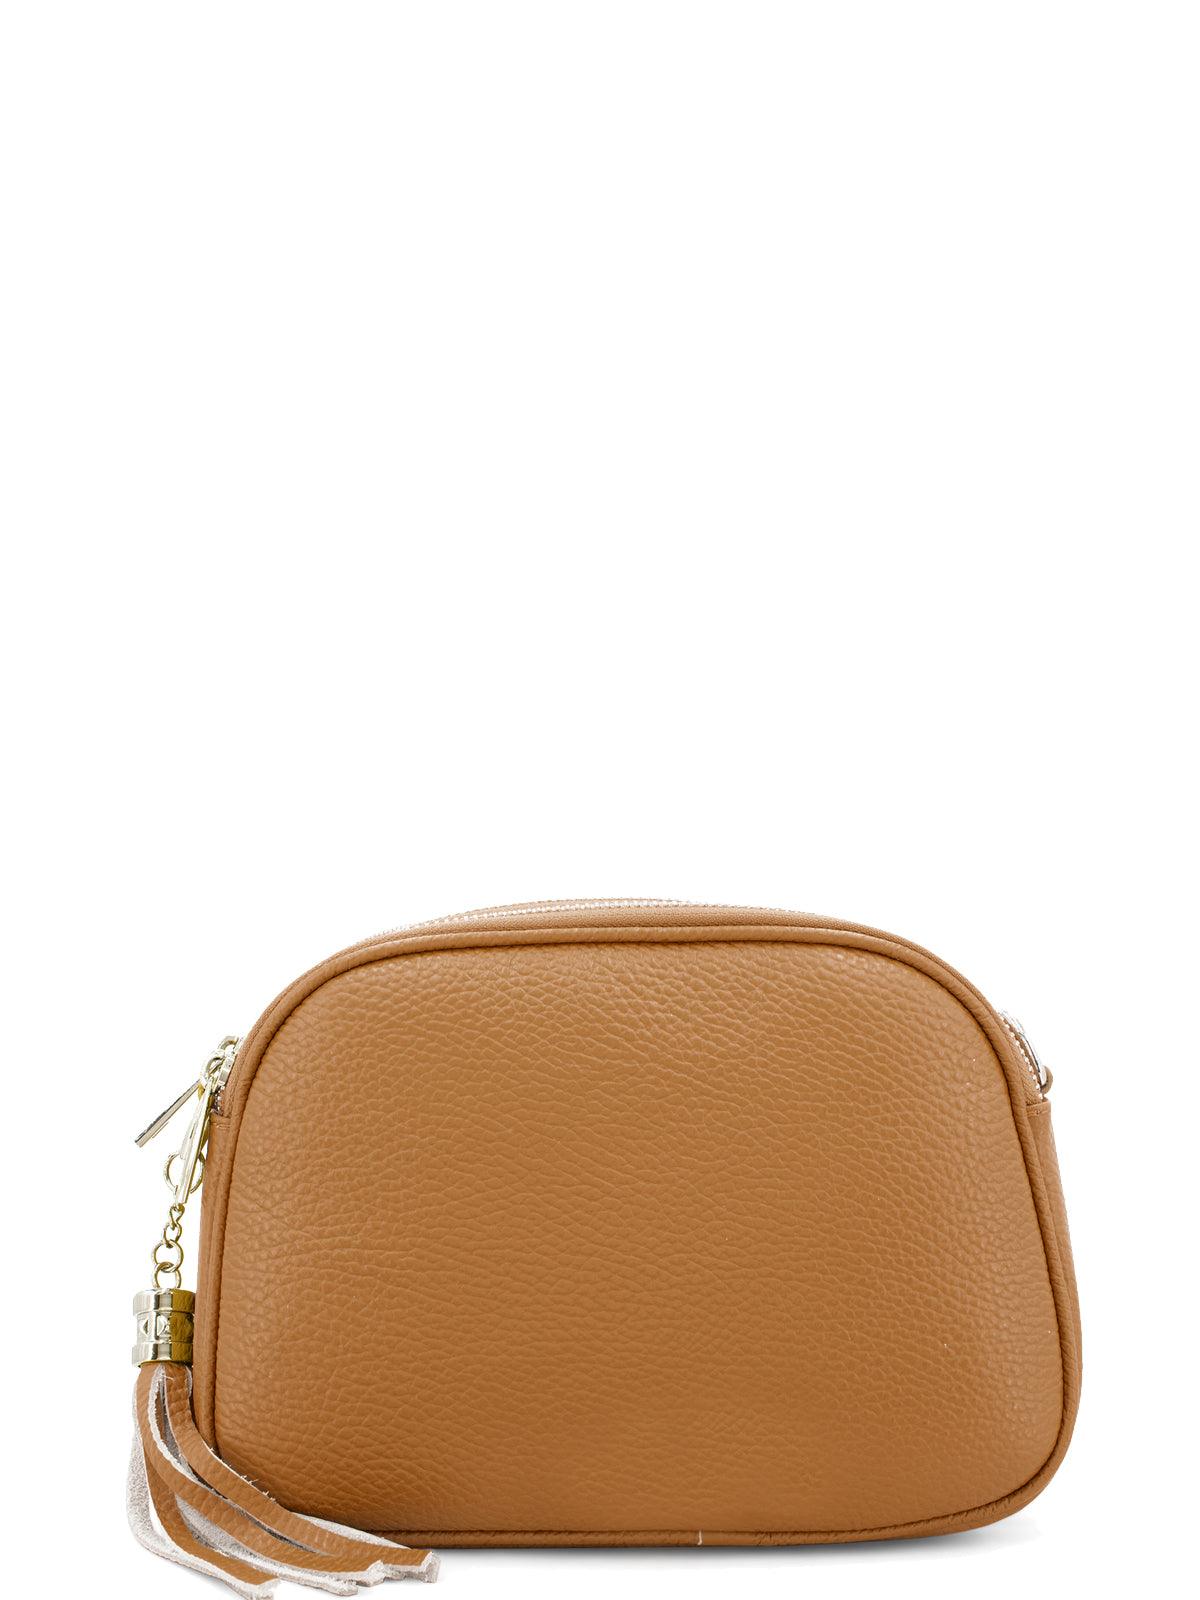 Camel Leather Multi Section Cross Body Camera Bag - Brix + Bailey